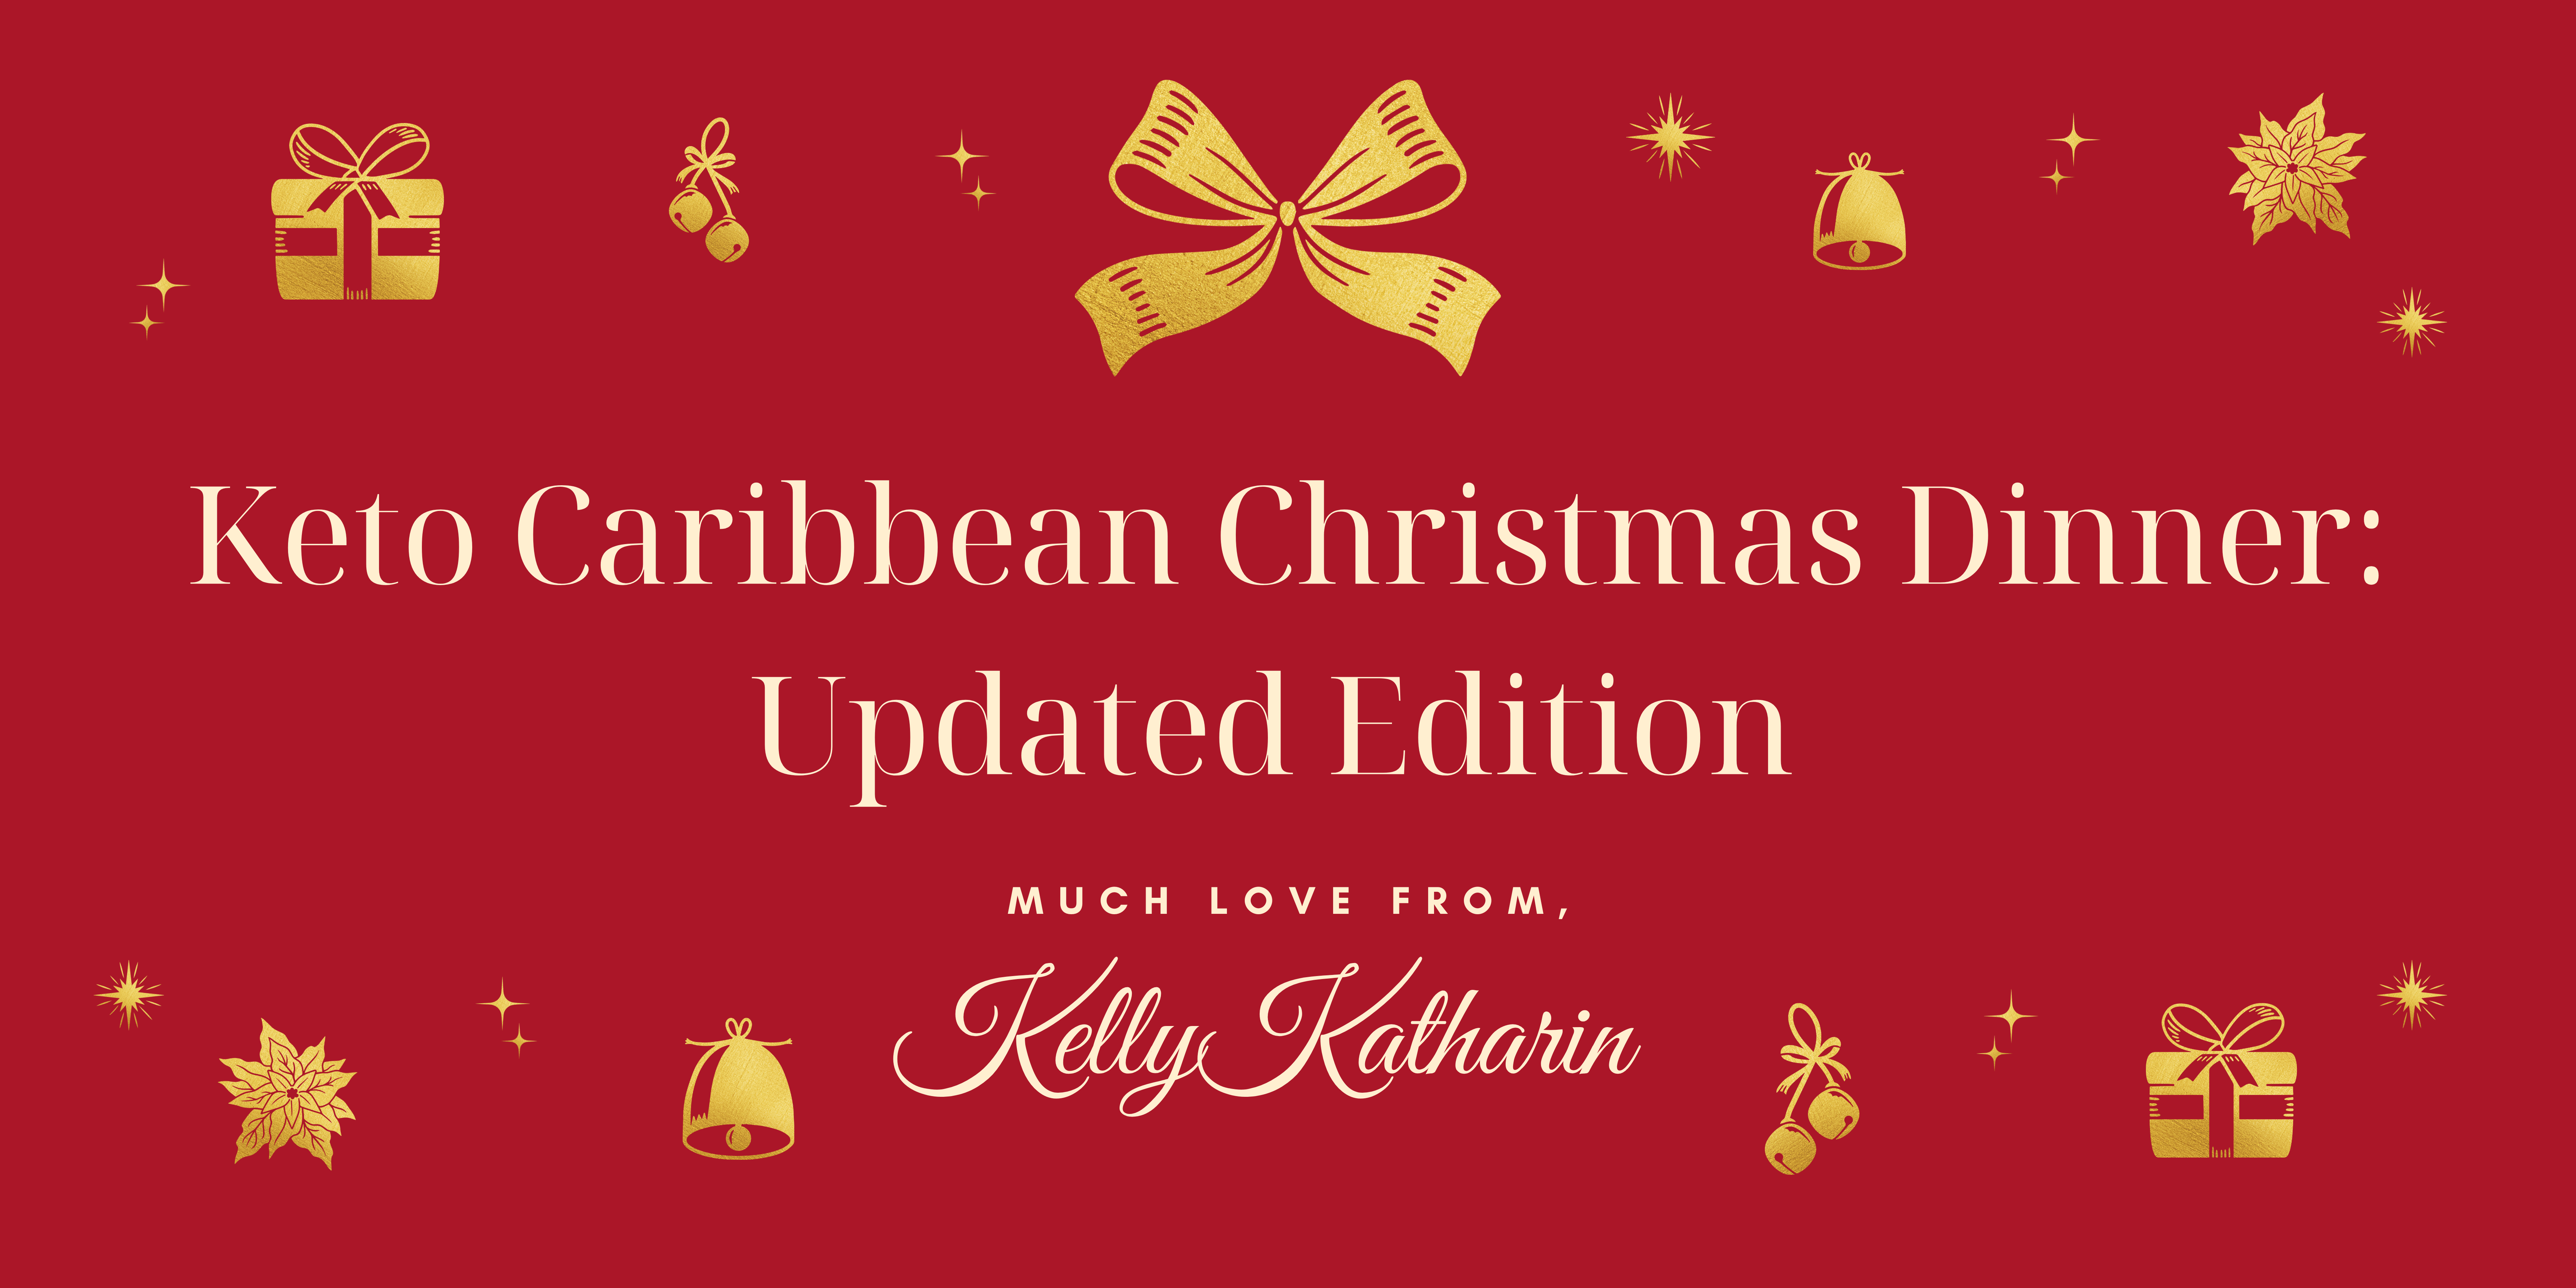 Keto Caribbean Christmas Dinner: Yes We Can! Updated Edition